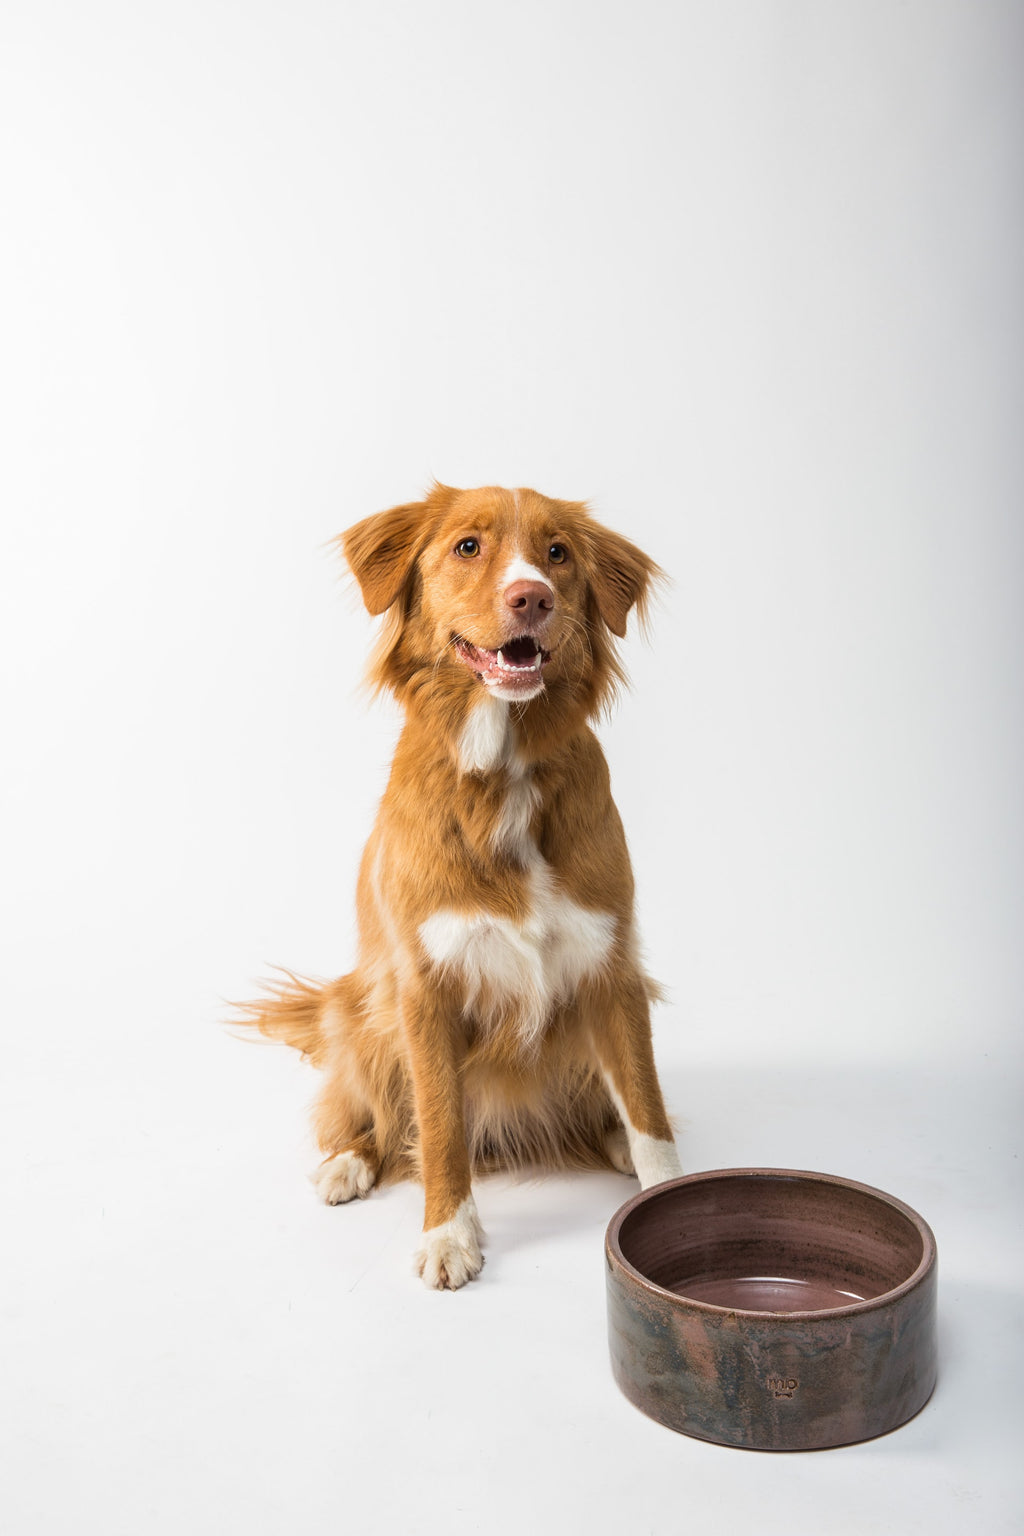 Is Wet Dog Food Good for Dogs?